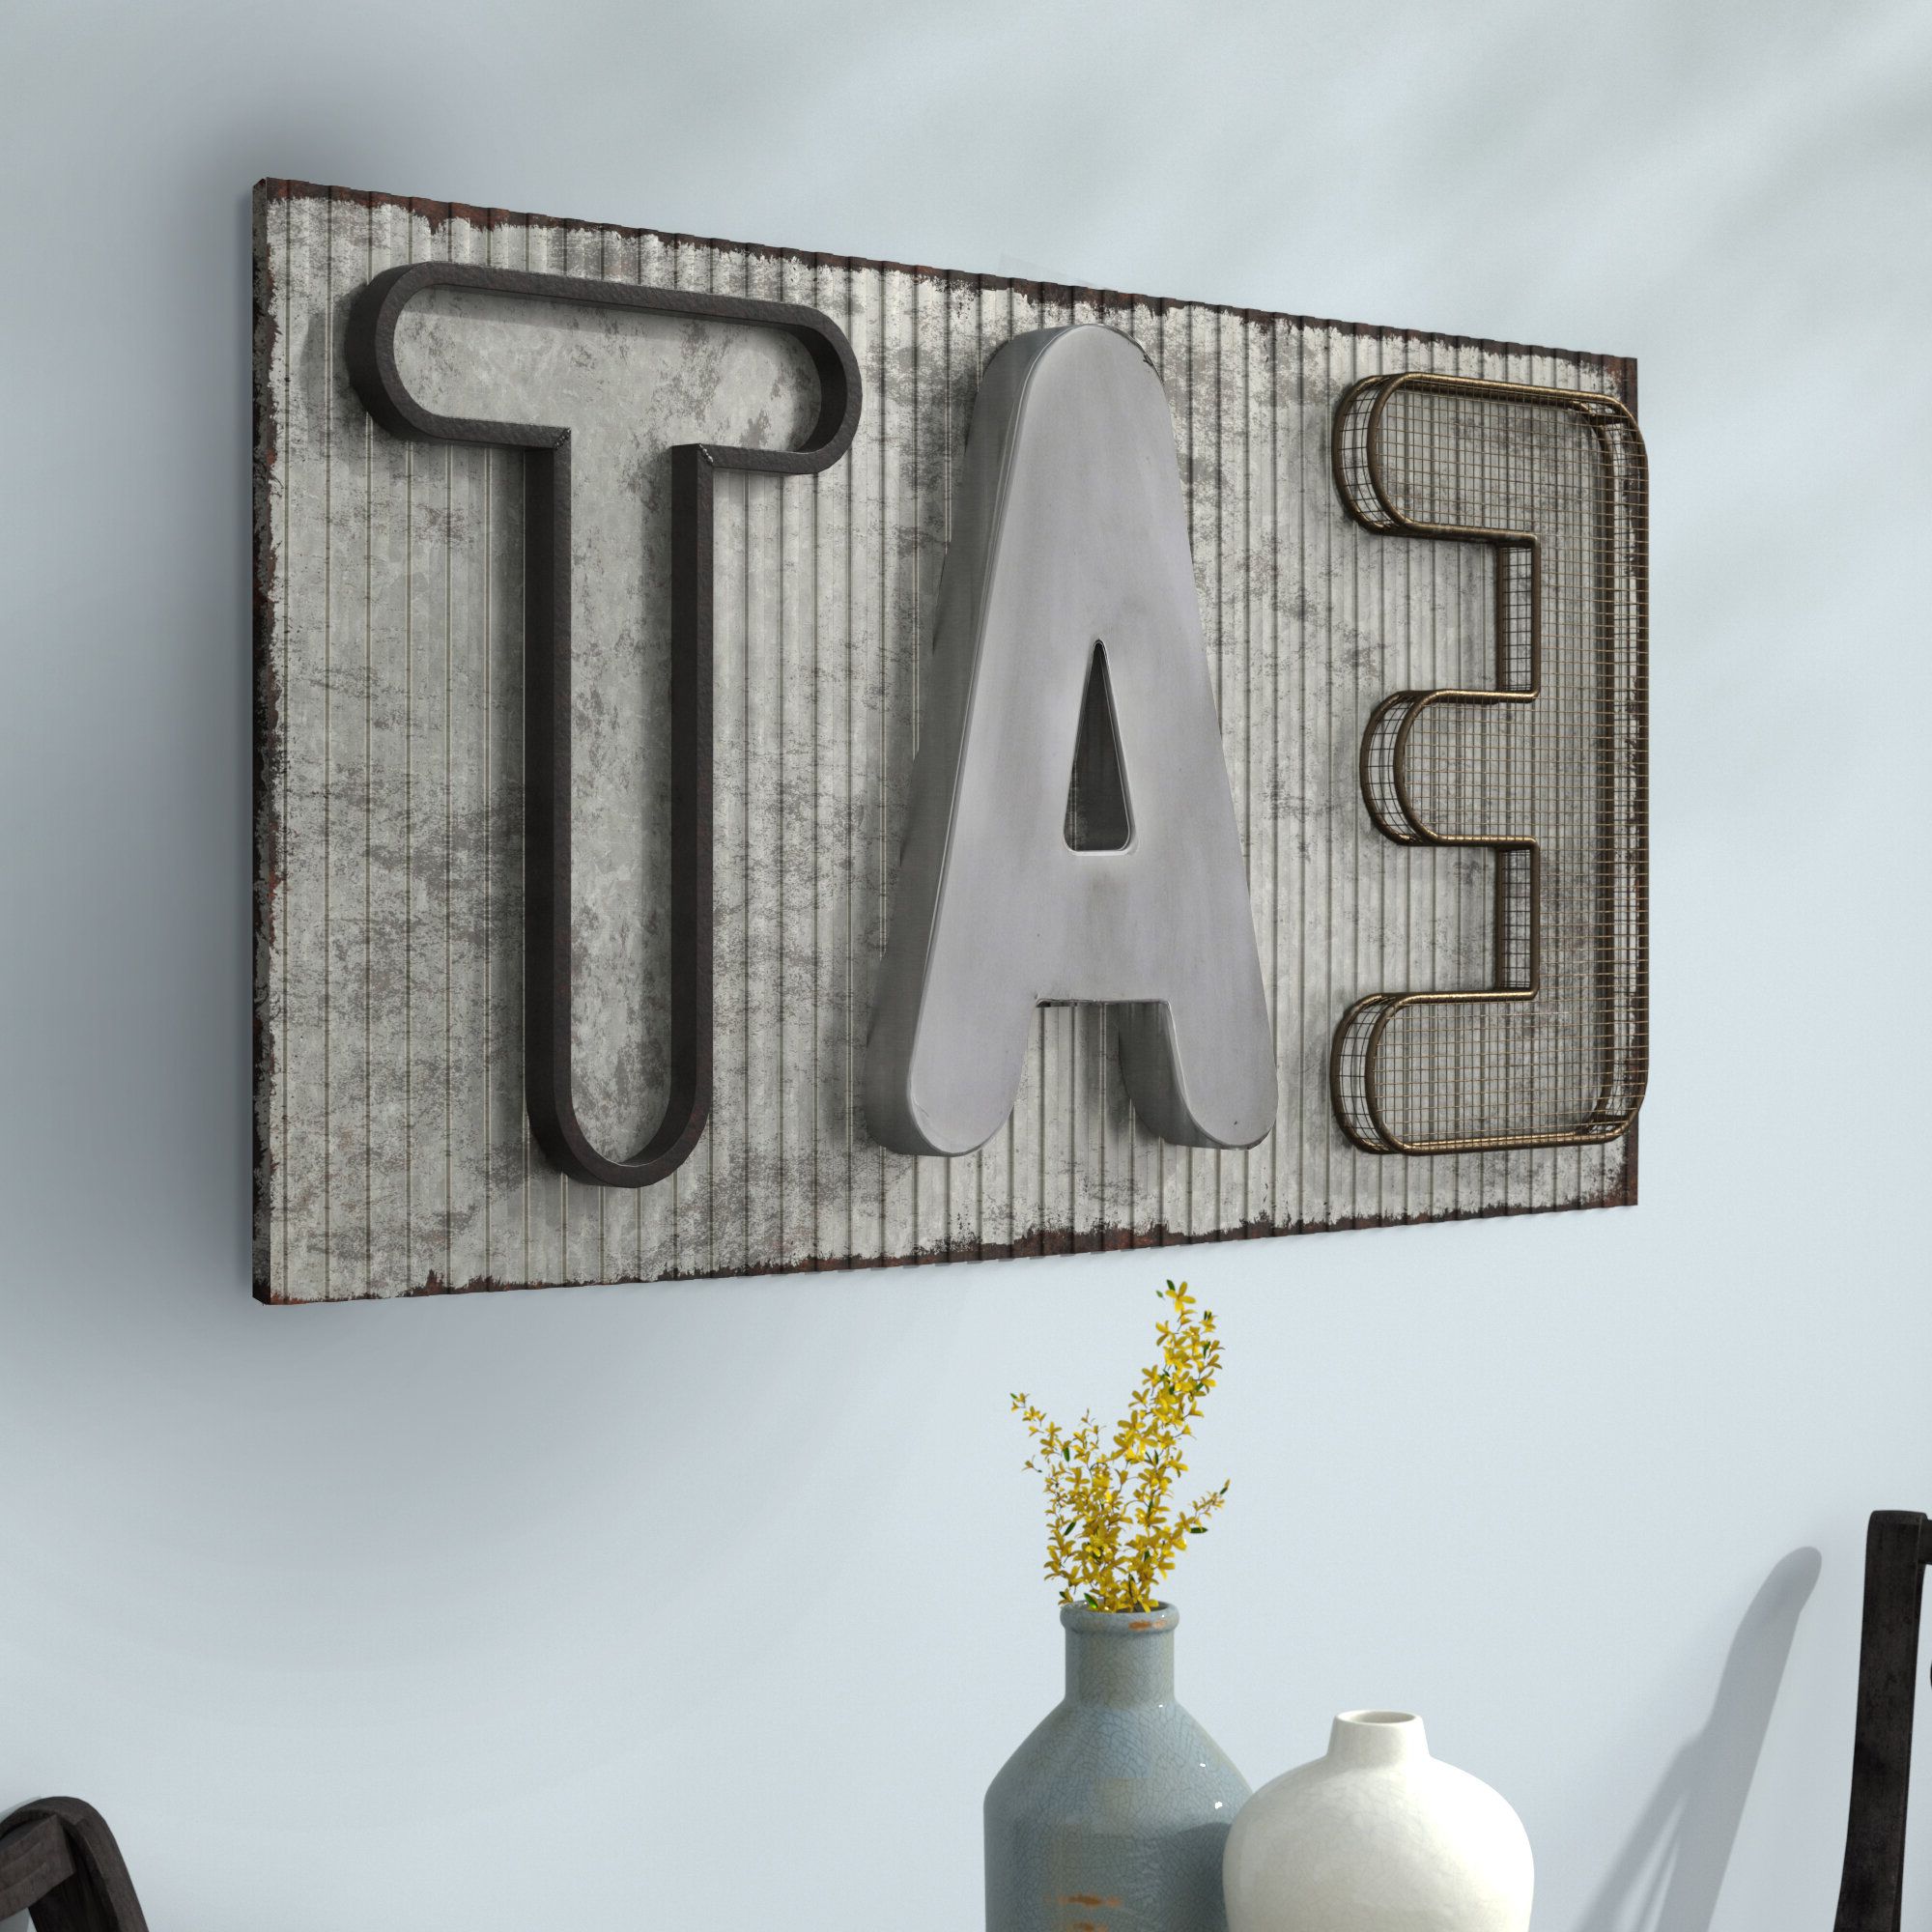 Laurel Foundry Modern Farmhouse Metal Industrial Eat Sign Wall Décor For 2020 Grey "eat" Sign With Rebar Decor (View 5 of 20)